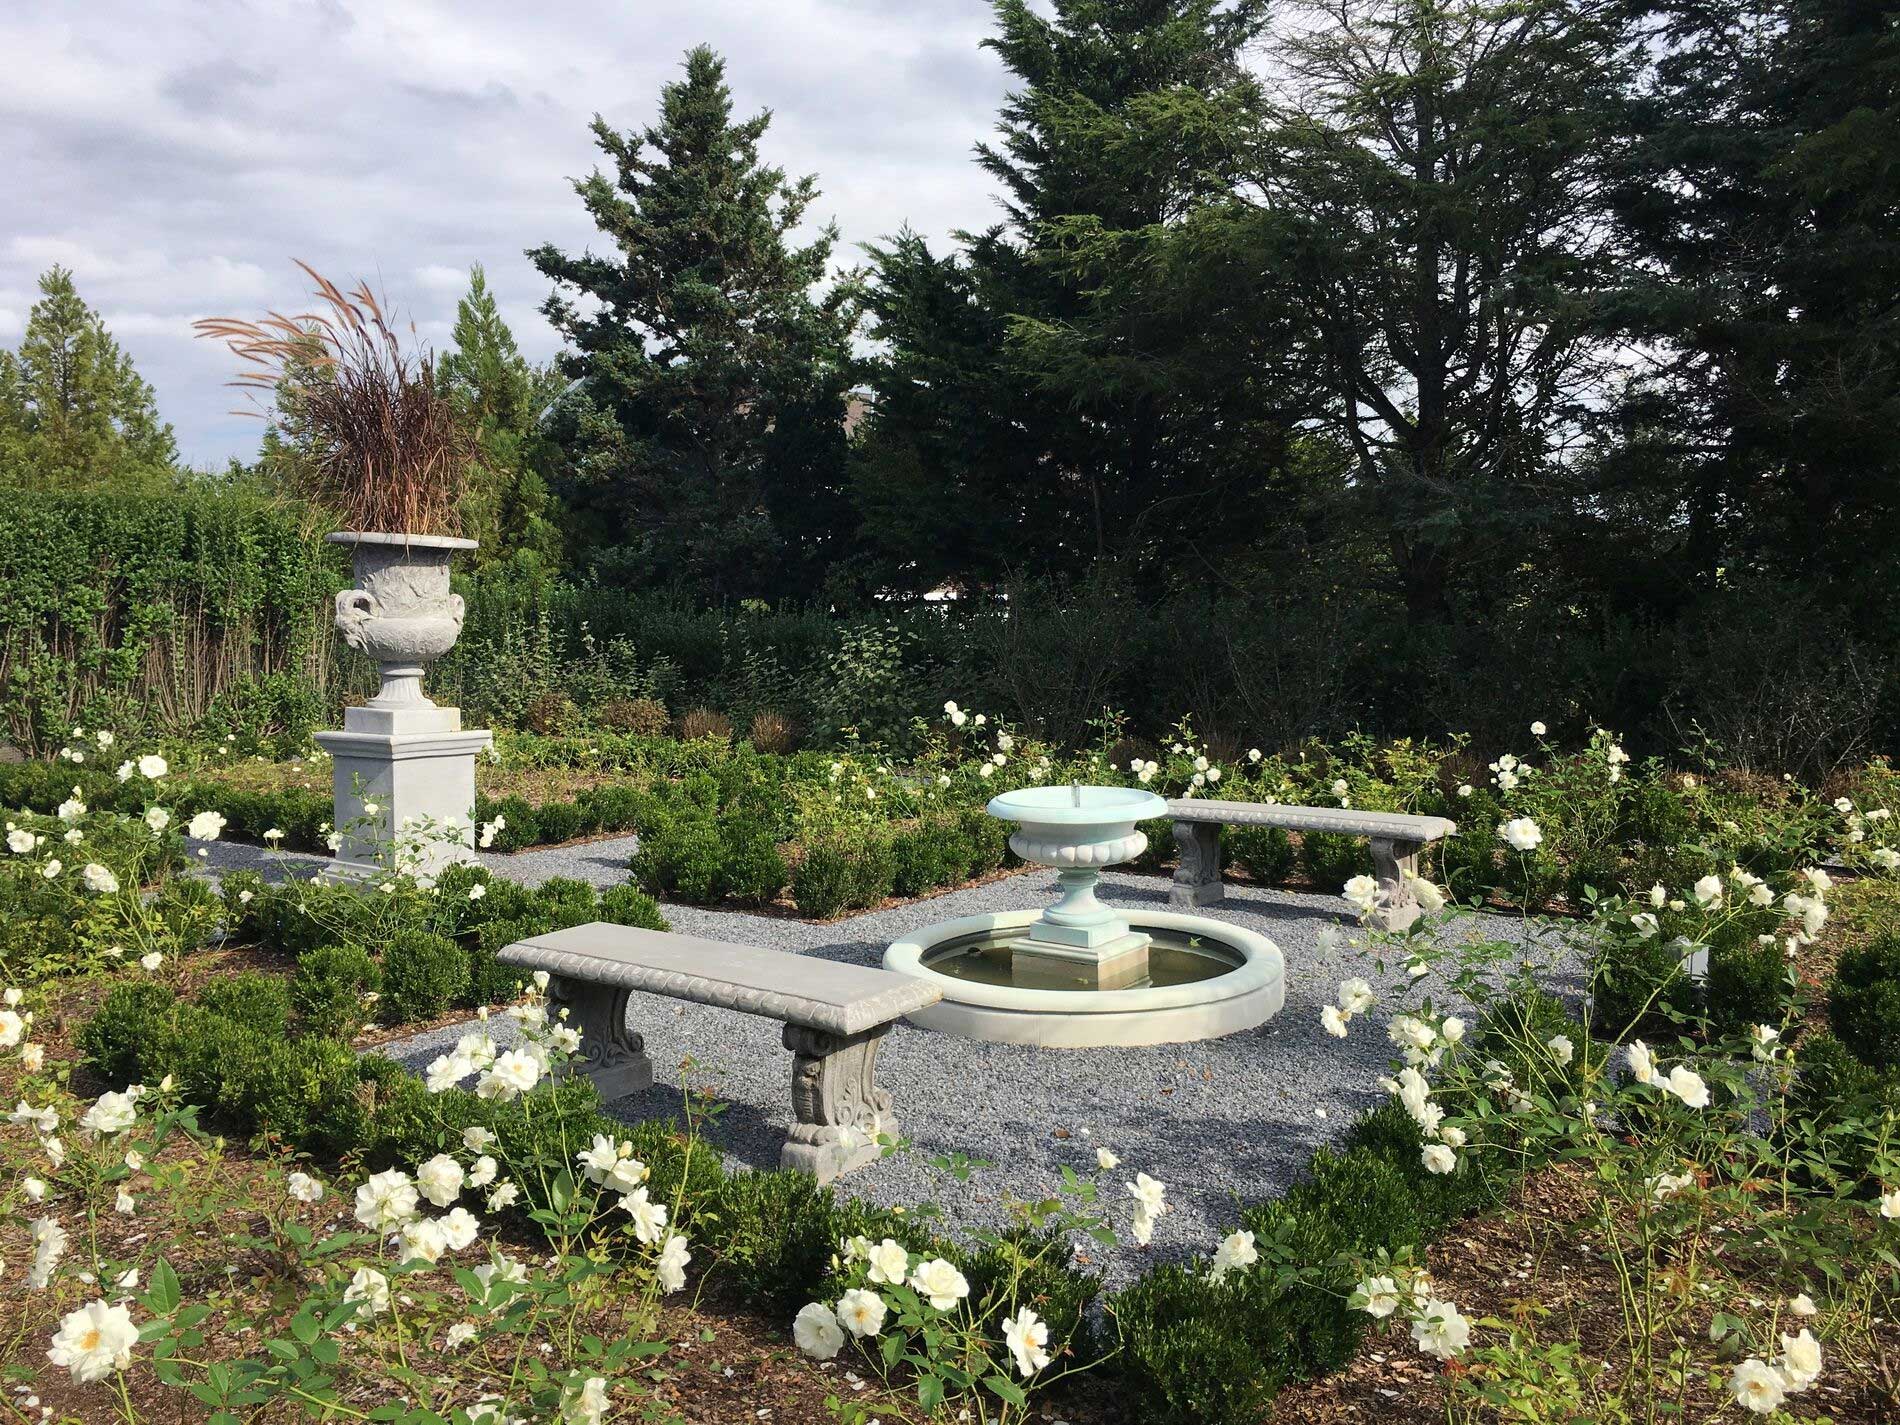 Another small fountain with two flanking benches is located at the center of the garden. The beds are delineated by low Boxwood hedges and filled with Iceberg Rose.